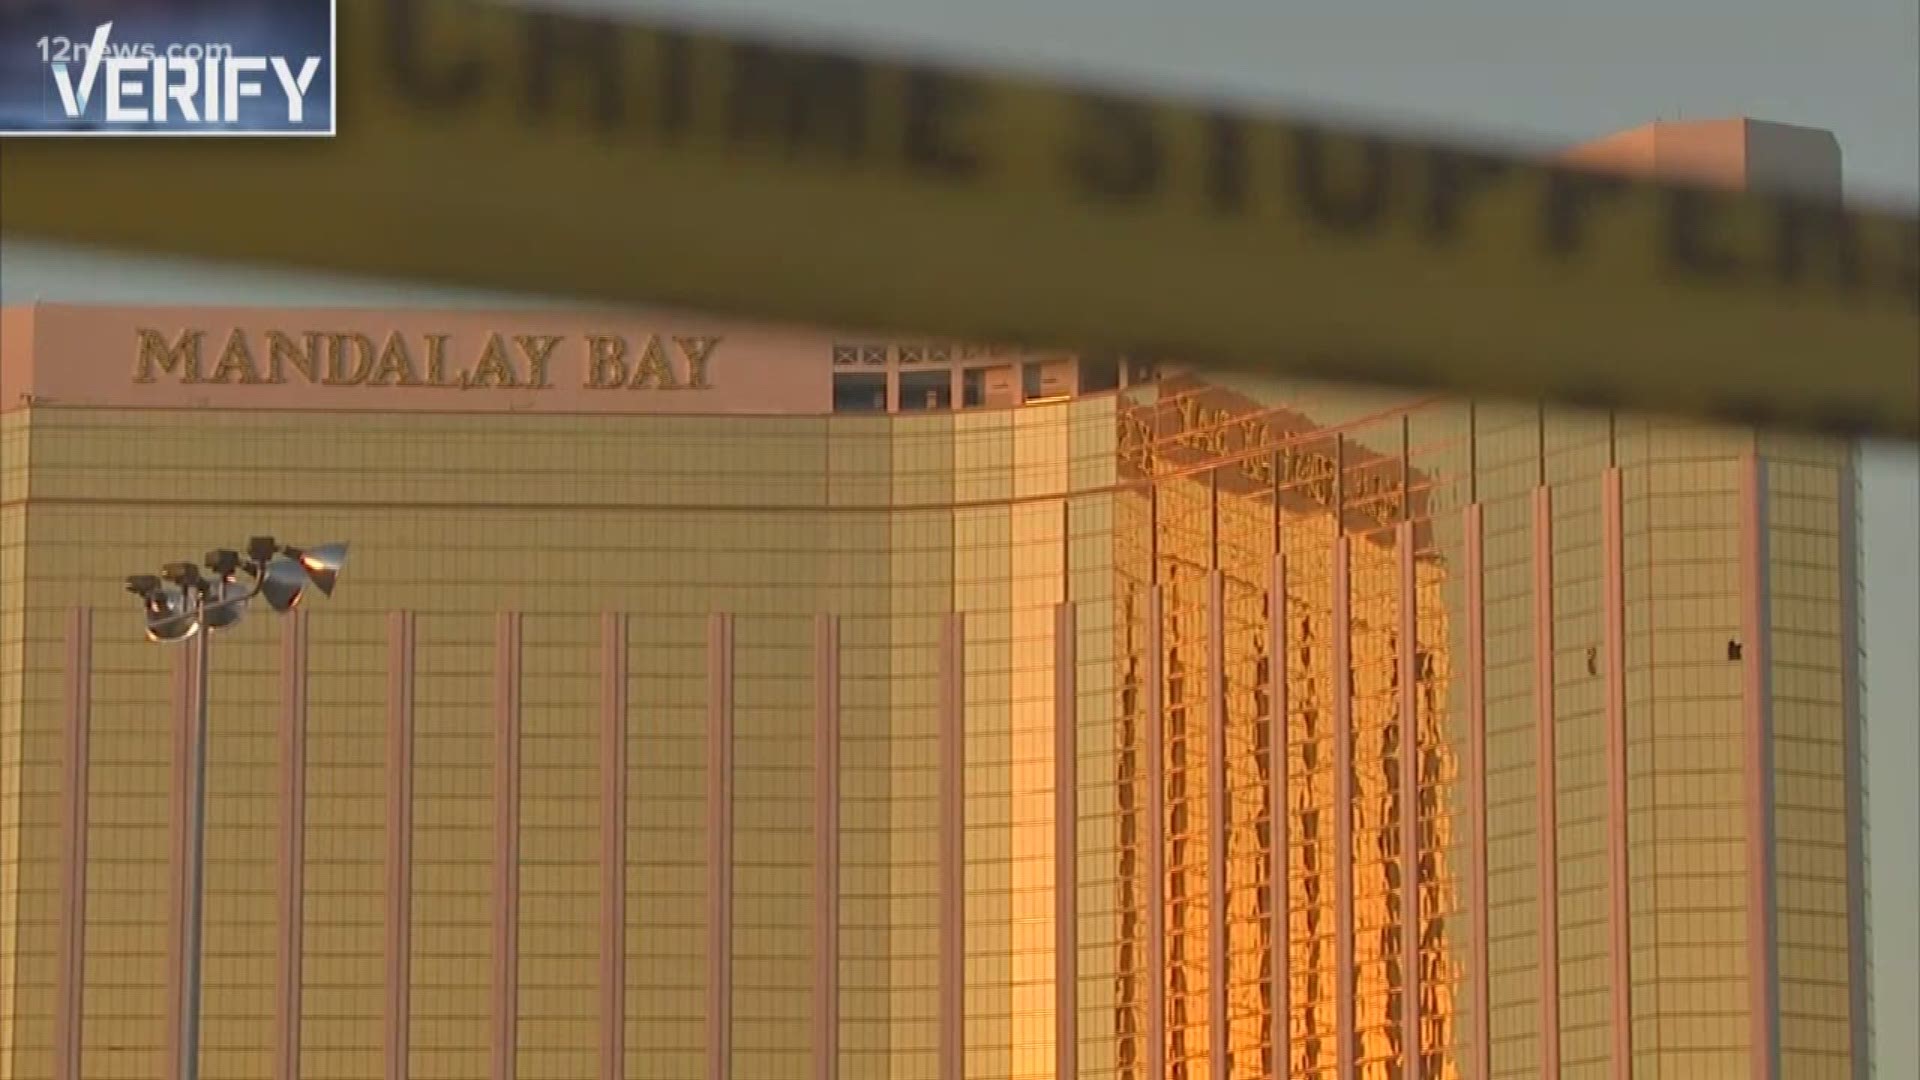 MGM has filed a law suit against the victims of the Las Vegas mass shooting. We ask a legal expert if this can be done.